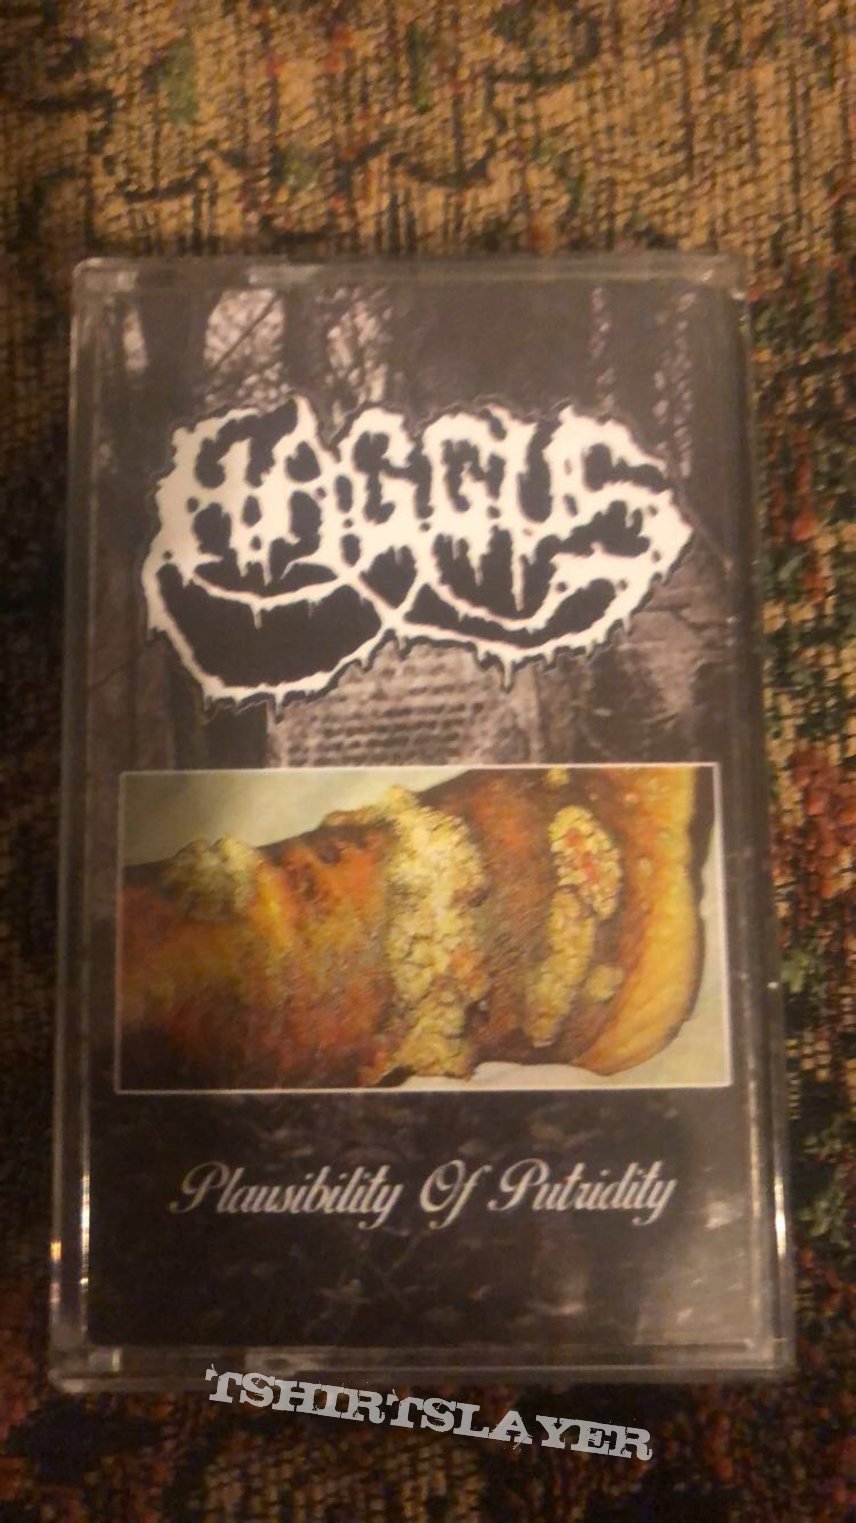 Haggus - Plausibility Of Putridity tape